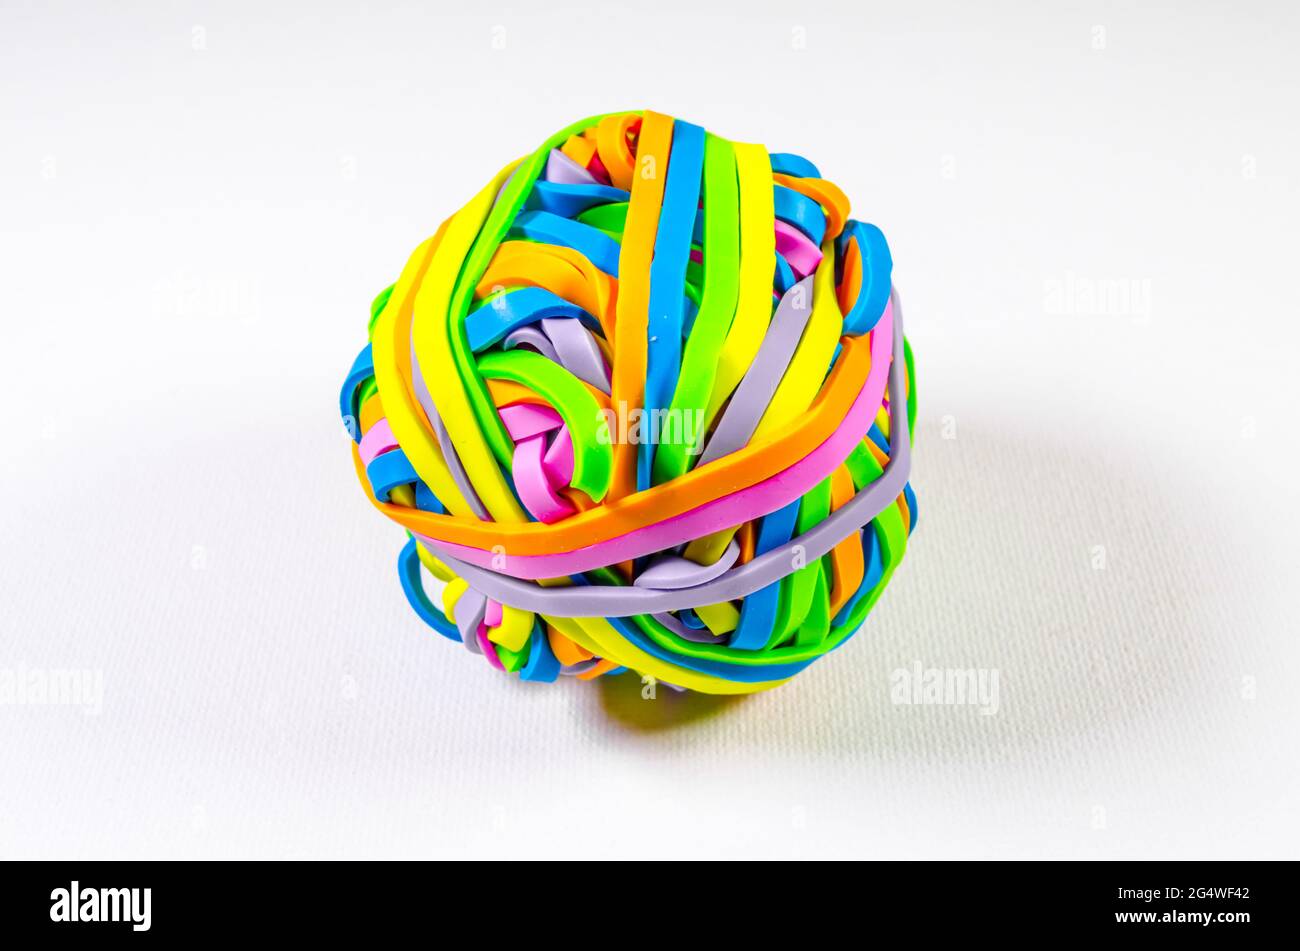 A Close-Up Studio Photograph of a Multicoloured Ball of Rubber Bands Stock Photo